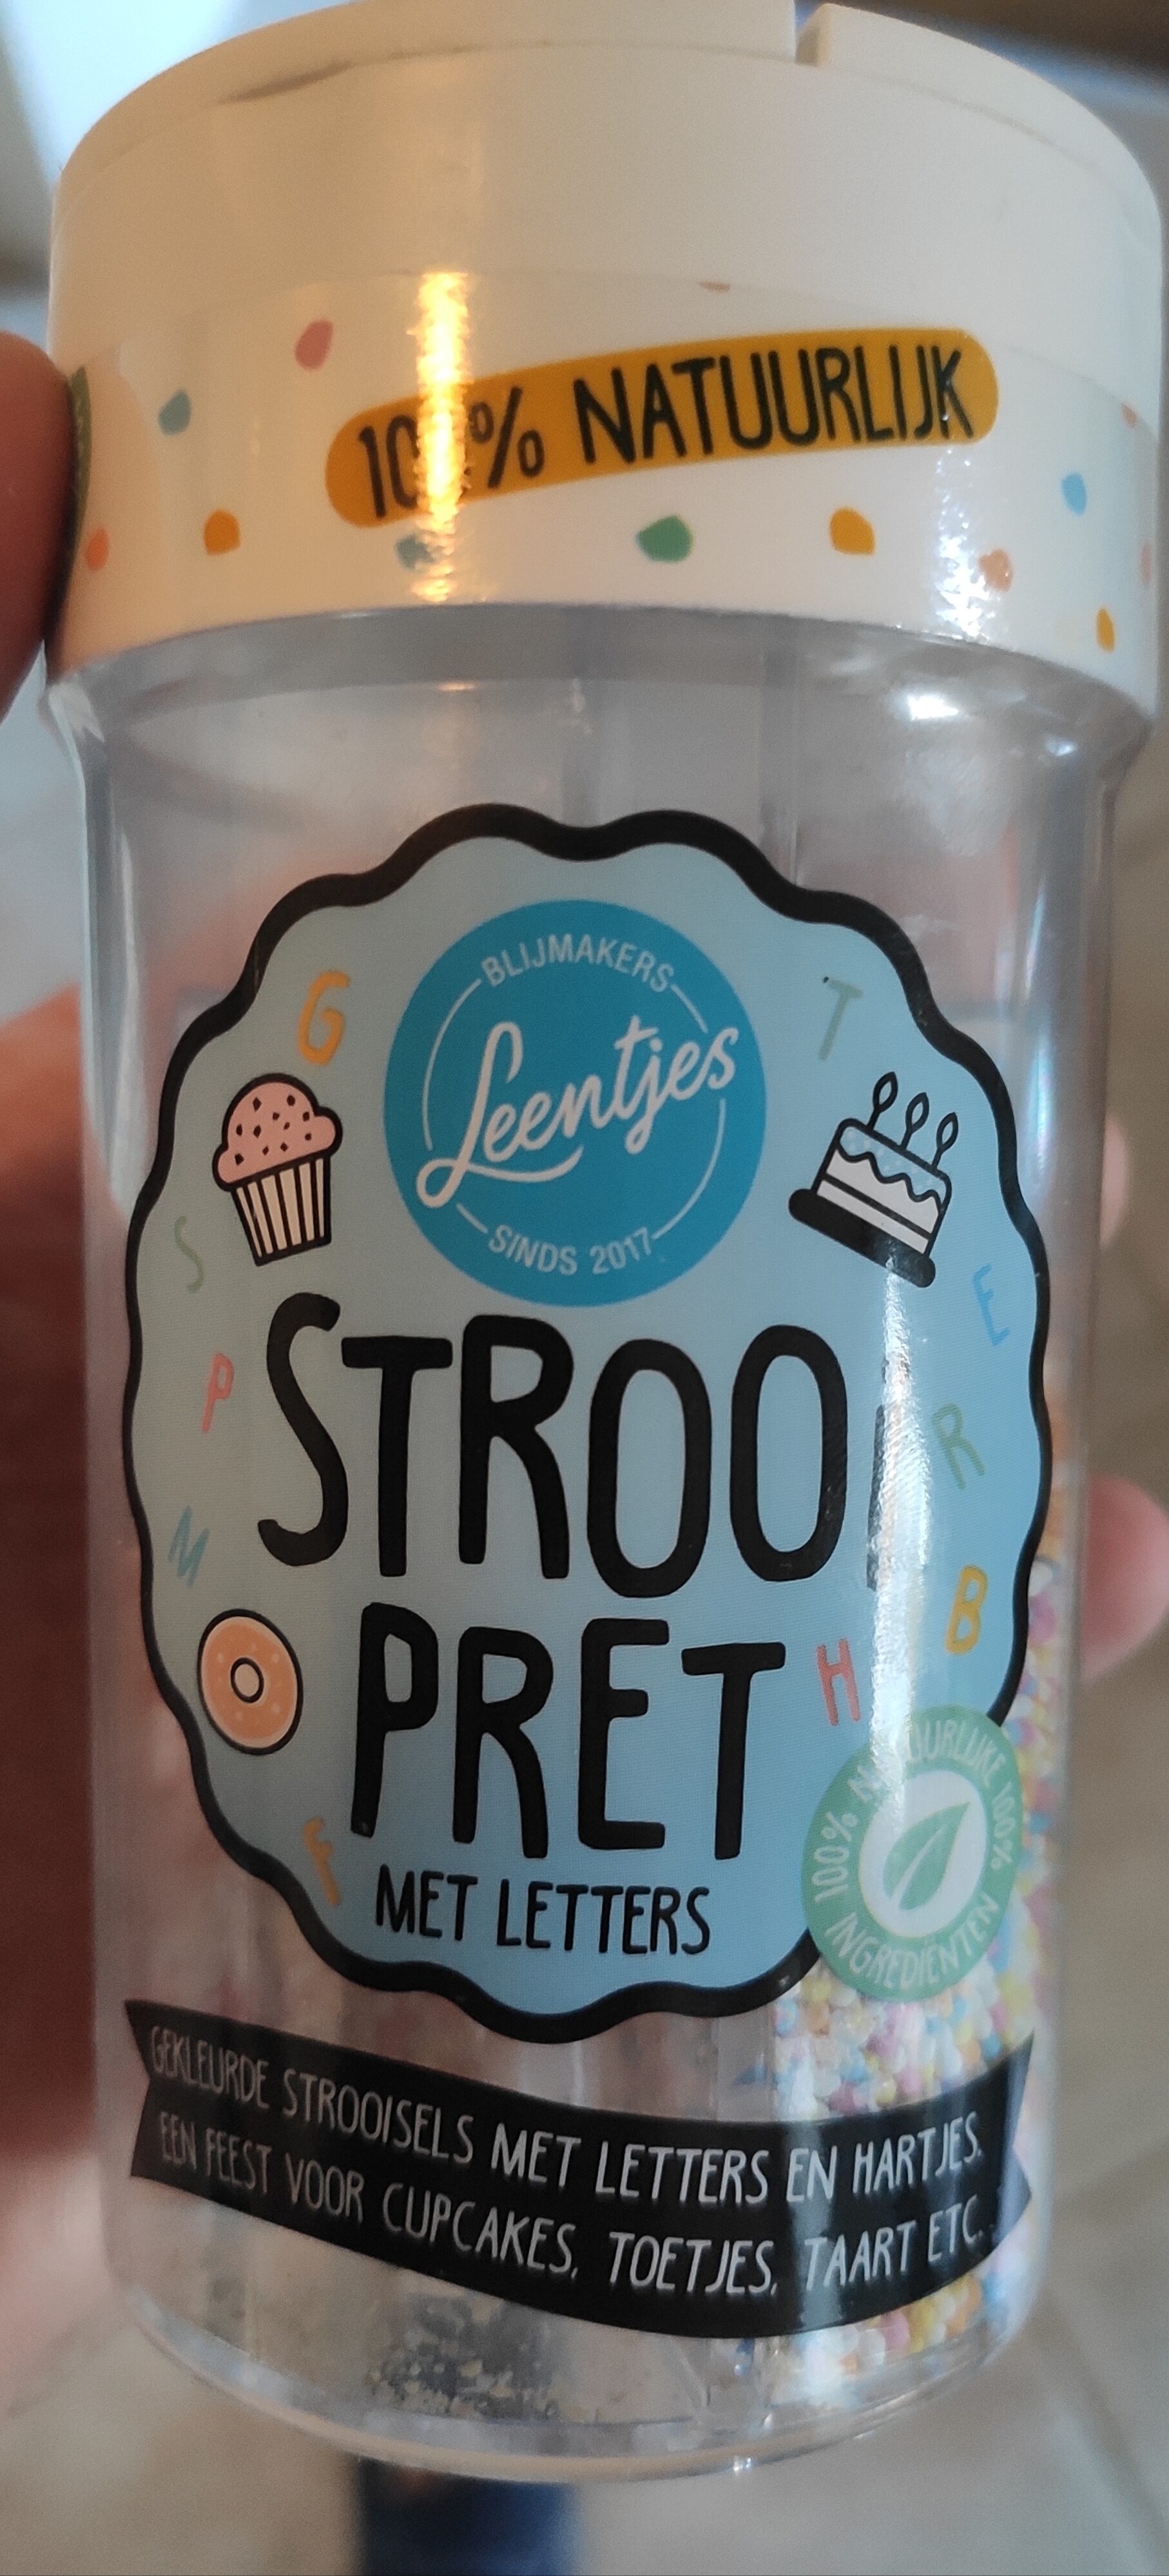 Strooi pret - Product - nl